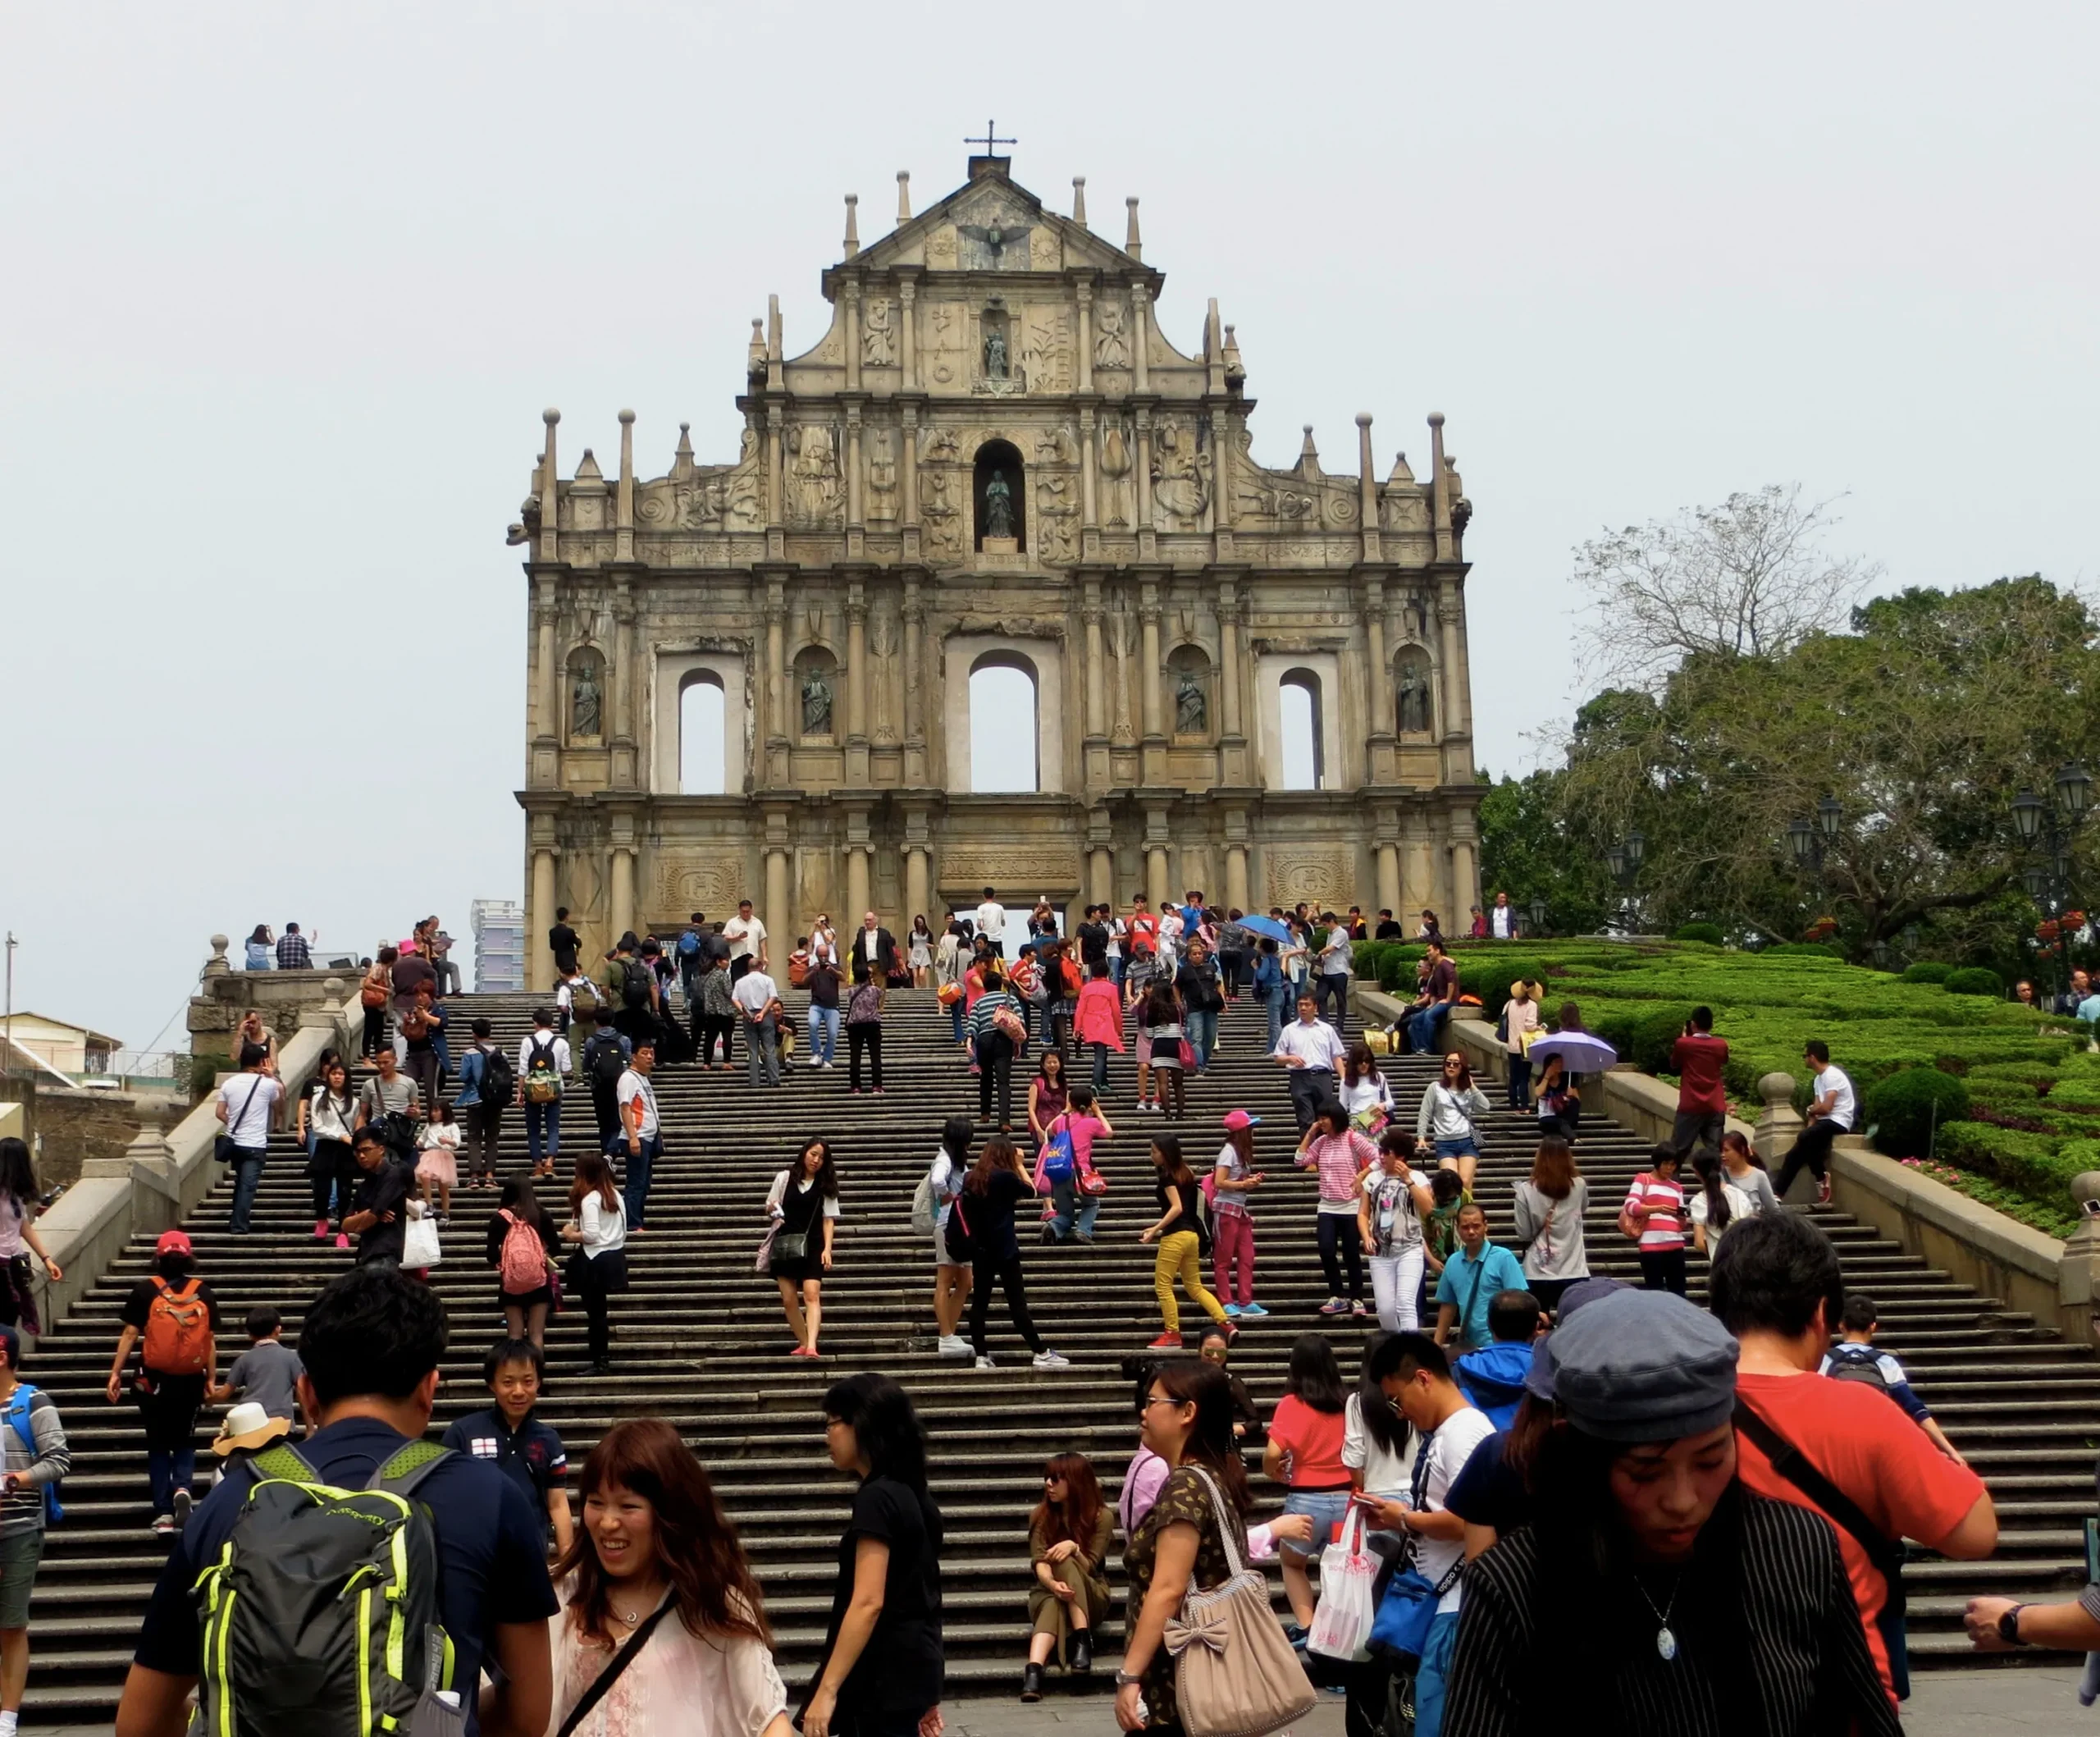 Christianity in Macao